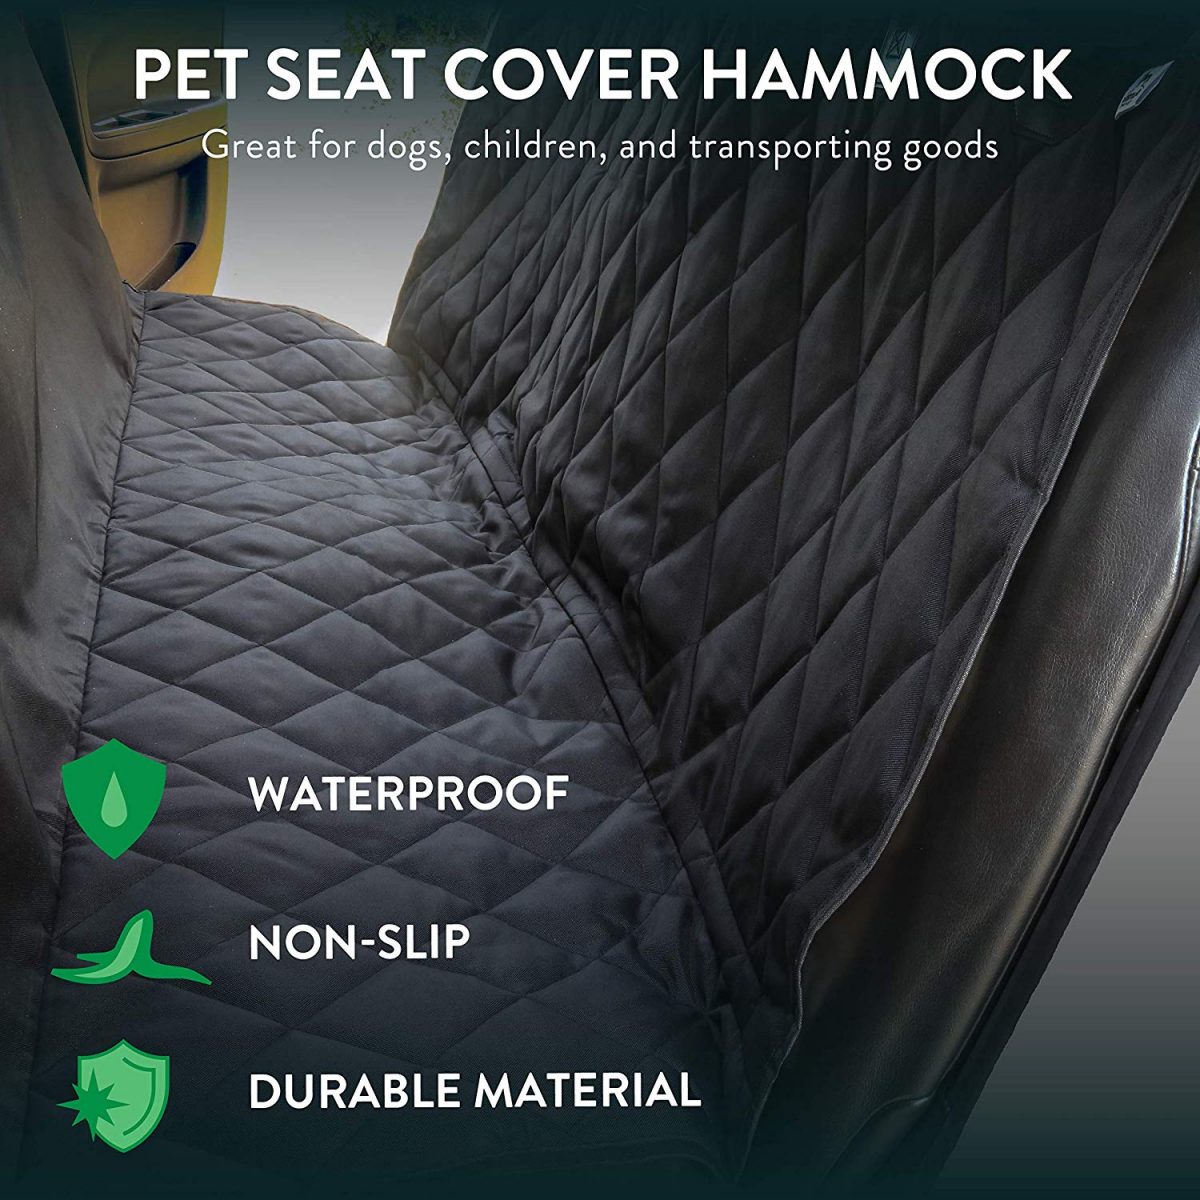 Best Car Seat Covers For Pets All About Cars News Gadgets Tips - Plush Paws Waterproof Hammock Pet Seat Cover